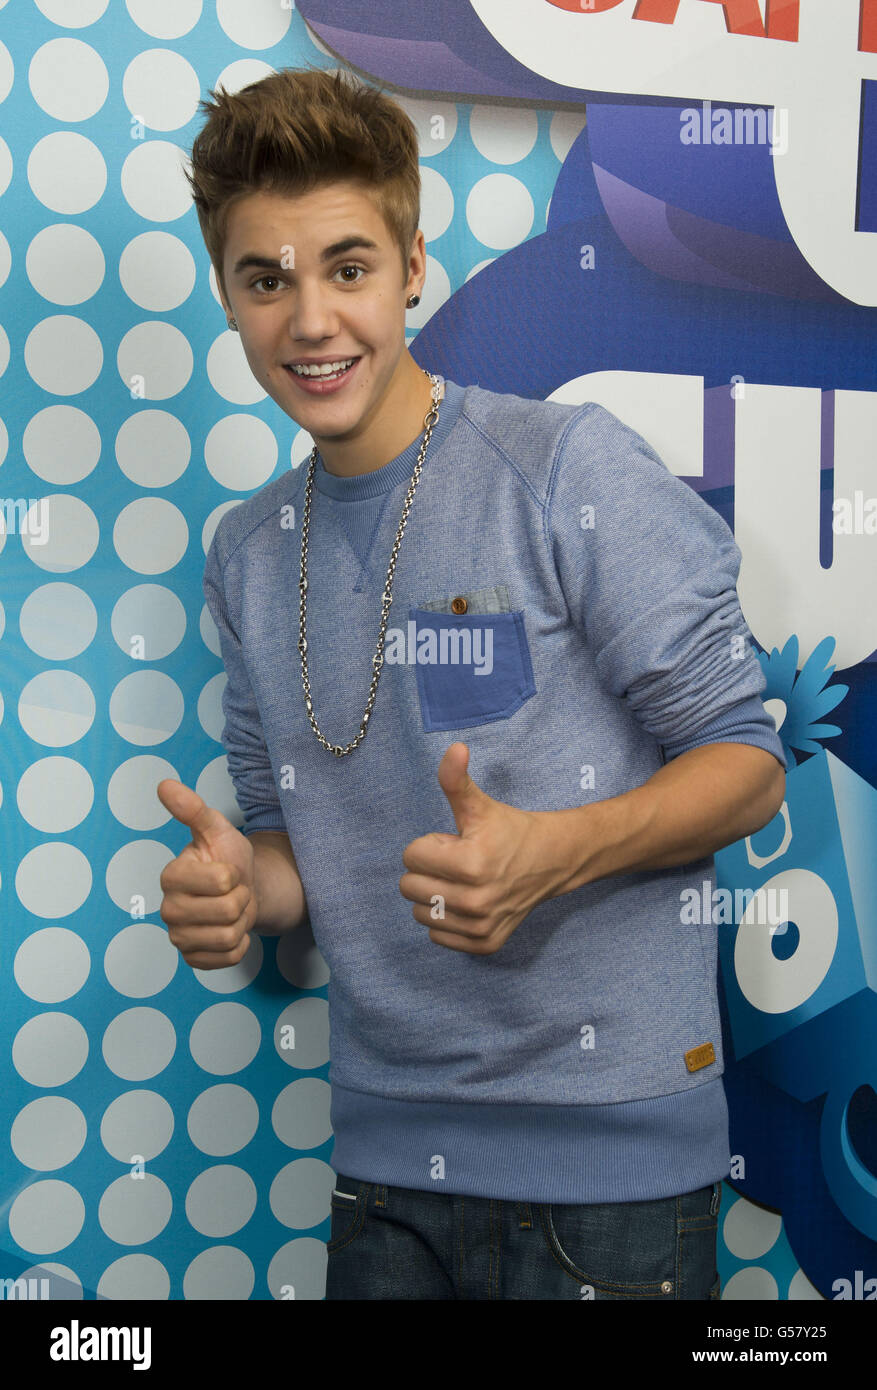 Justin Bieber backstage at Capital FM's Summertime Ball at Wembley Stadium, London. PRESS ASSOCIATION Photo. Picture date: Saturday June 9, 2012. Photo credit should read: PA Wire Stock Photo